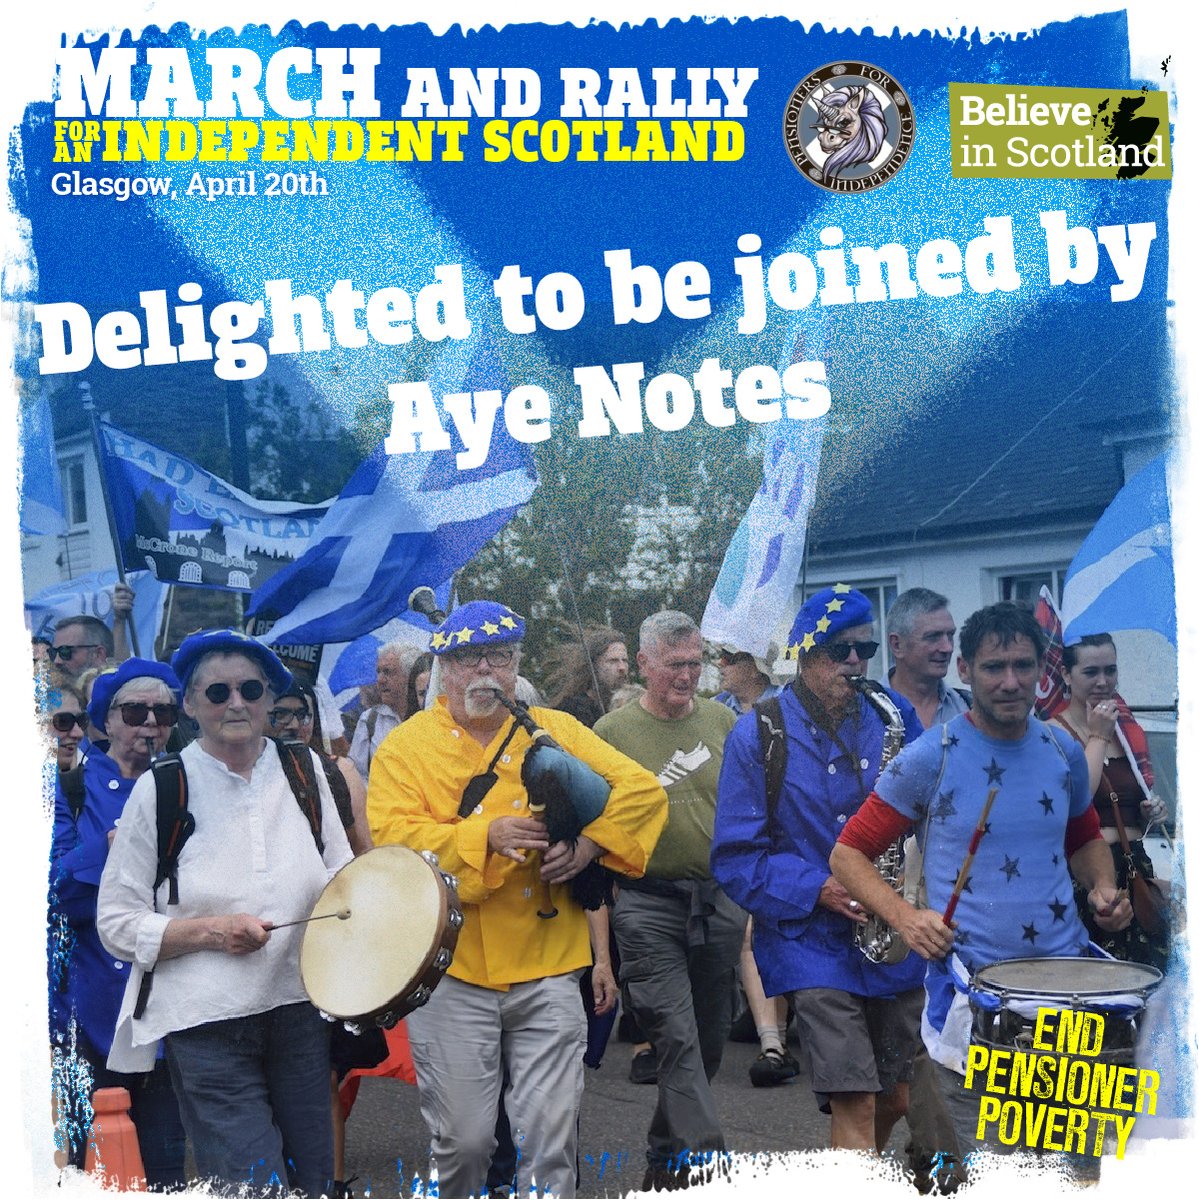 📣 We are delighted to announce that we will be joined by Aye Notes! 🏴󠁧󠁢󠁳󠁣󠁴󠁿 Let’s march together to unleash Scotland's true potential! ✍️ Sign up here to make sure you don’t miss an update: bit.ly/3uj64Mi